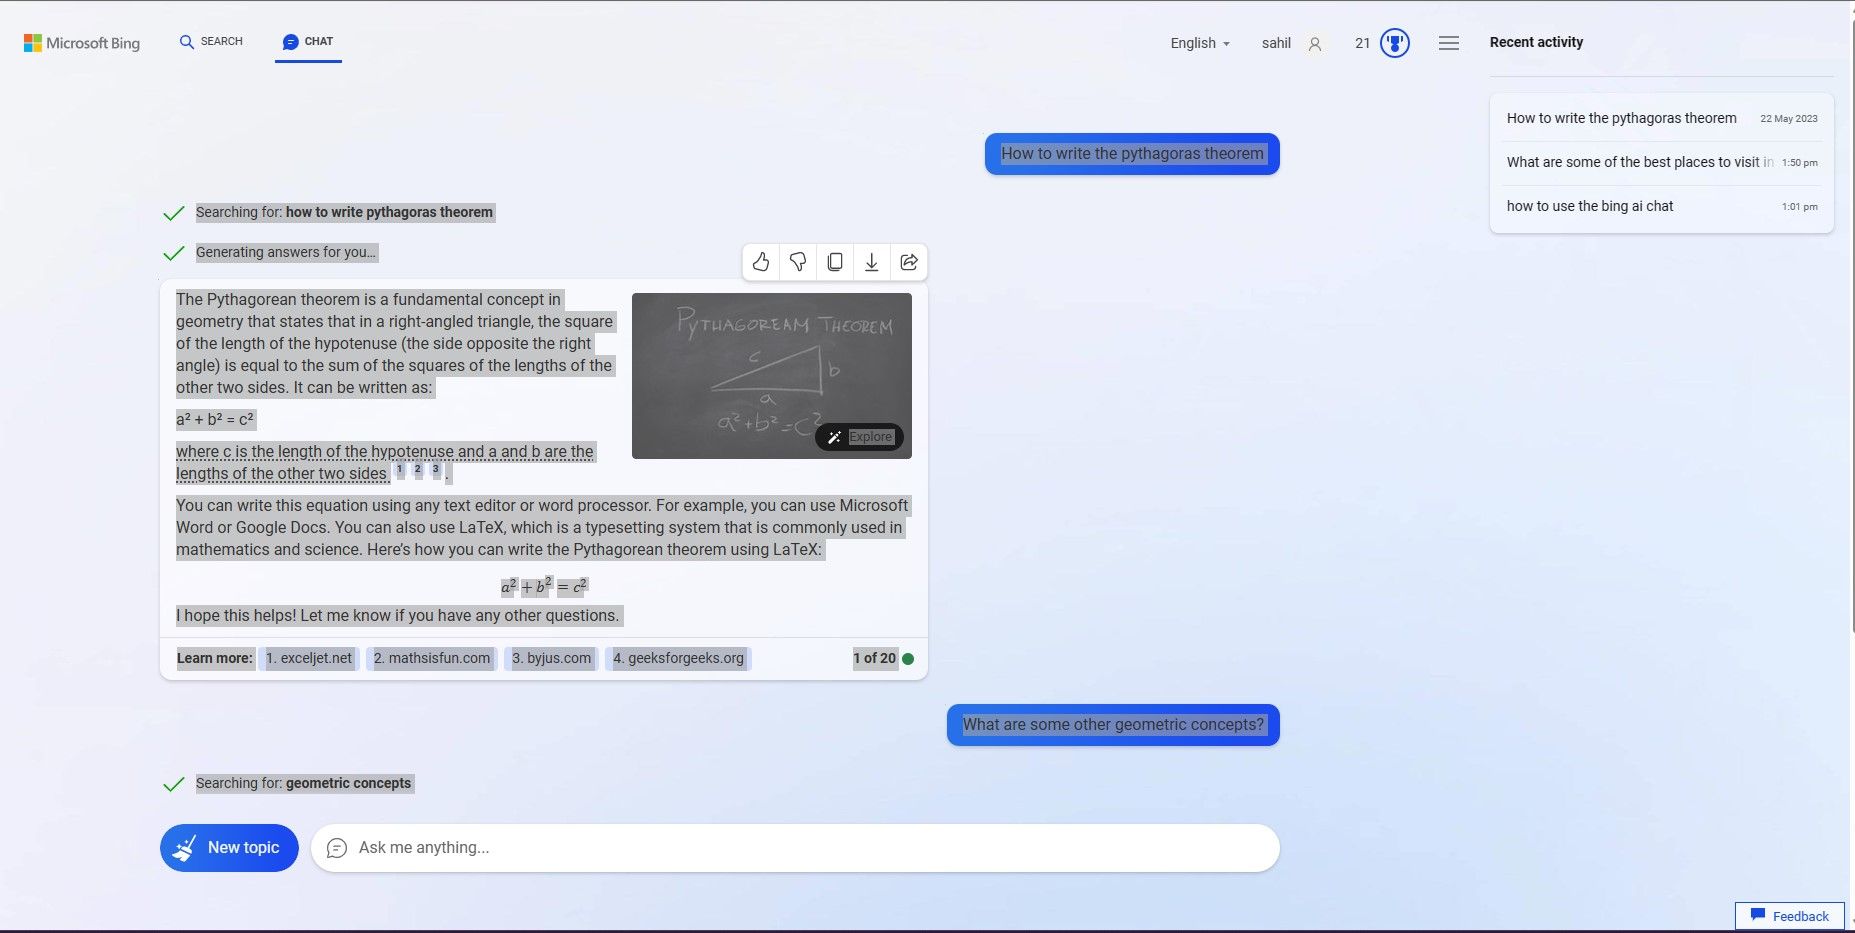 Selected text on Bing's AI chat window